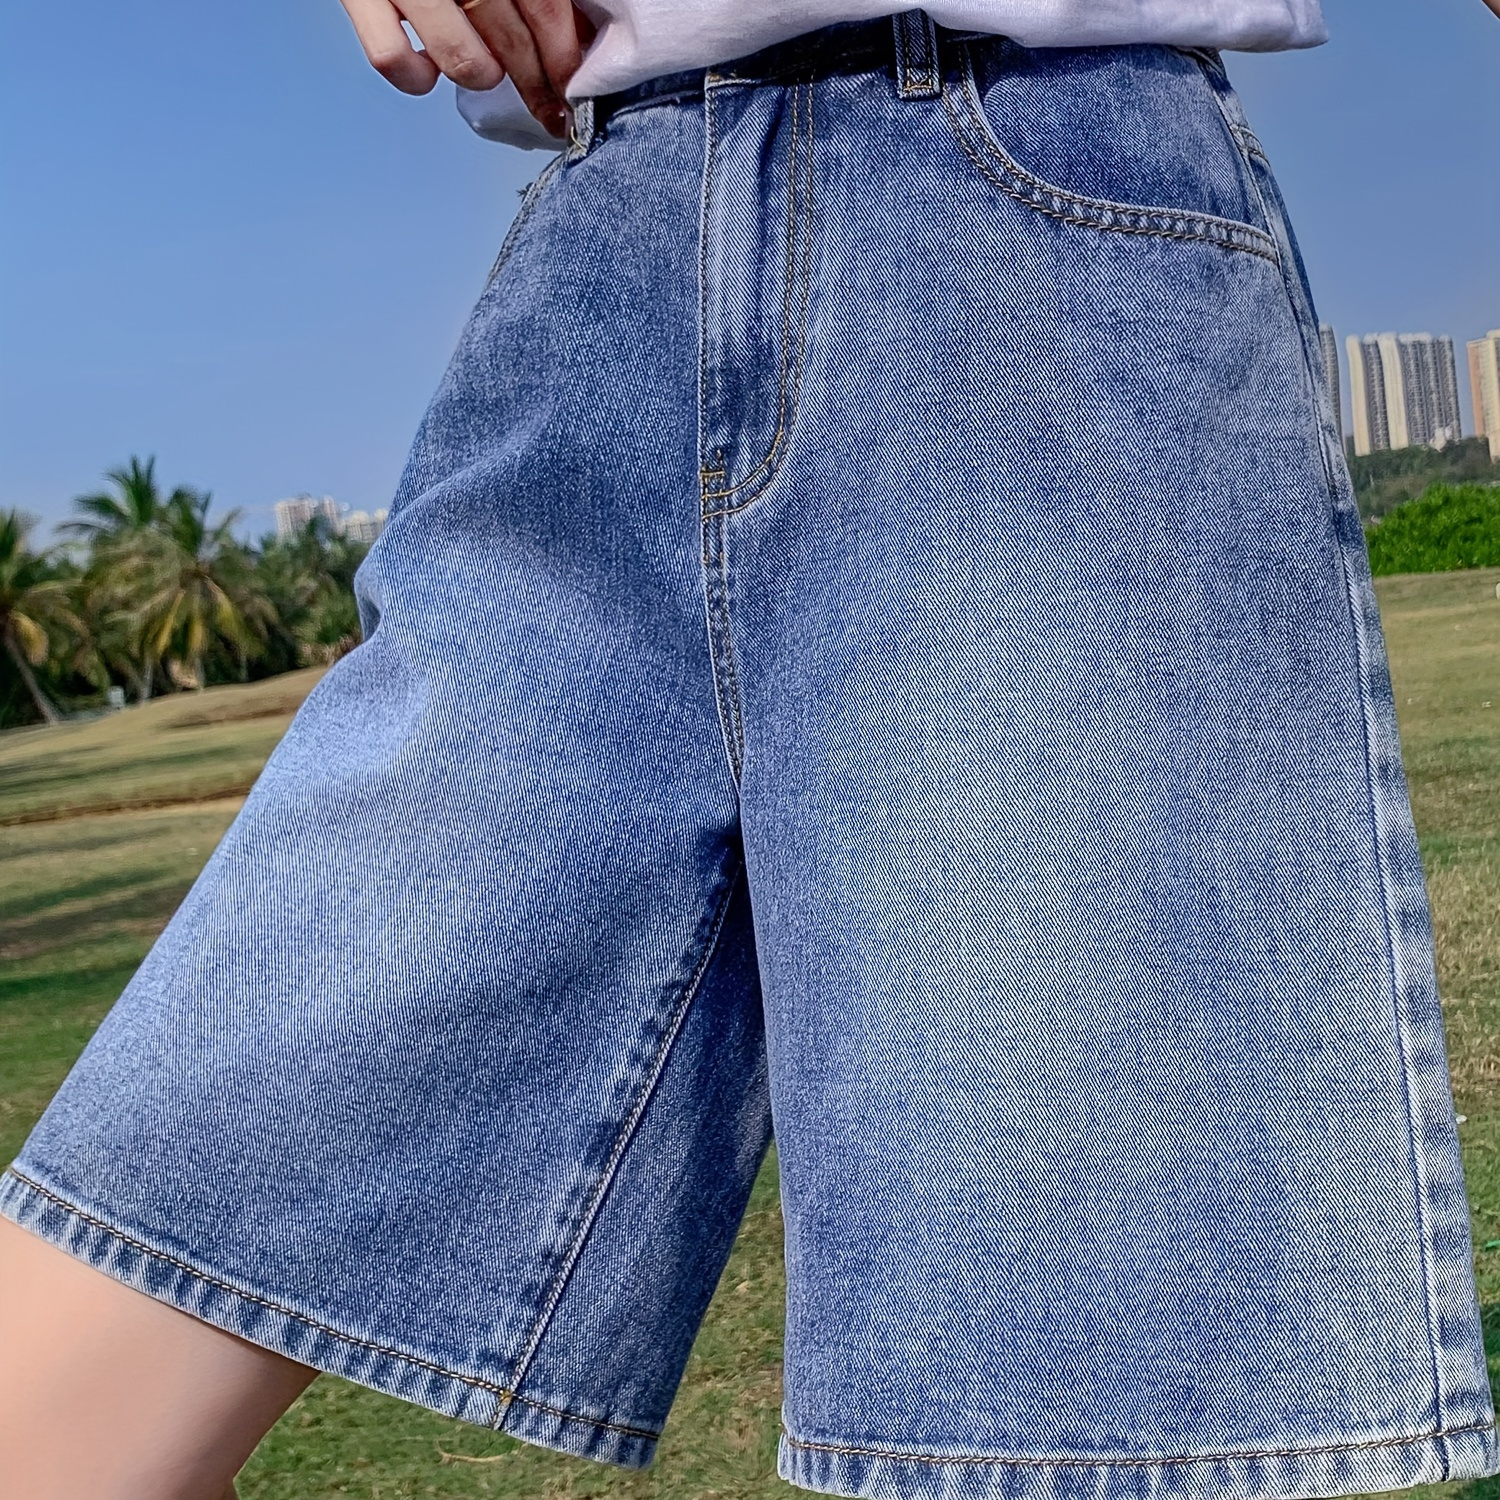 

Women's Plus Size Bermuda High Waisted Denim Shorts For Summer With Pockets, Elastic Waist Loose Straight Jean Shorts For Women, Casual Blue Color Comfy Denim Bottoms, Women's Clothing